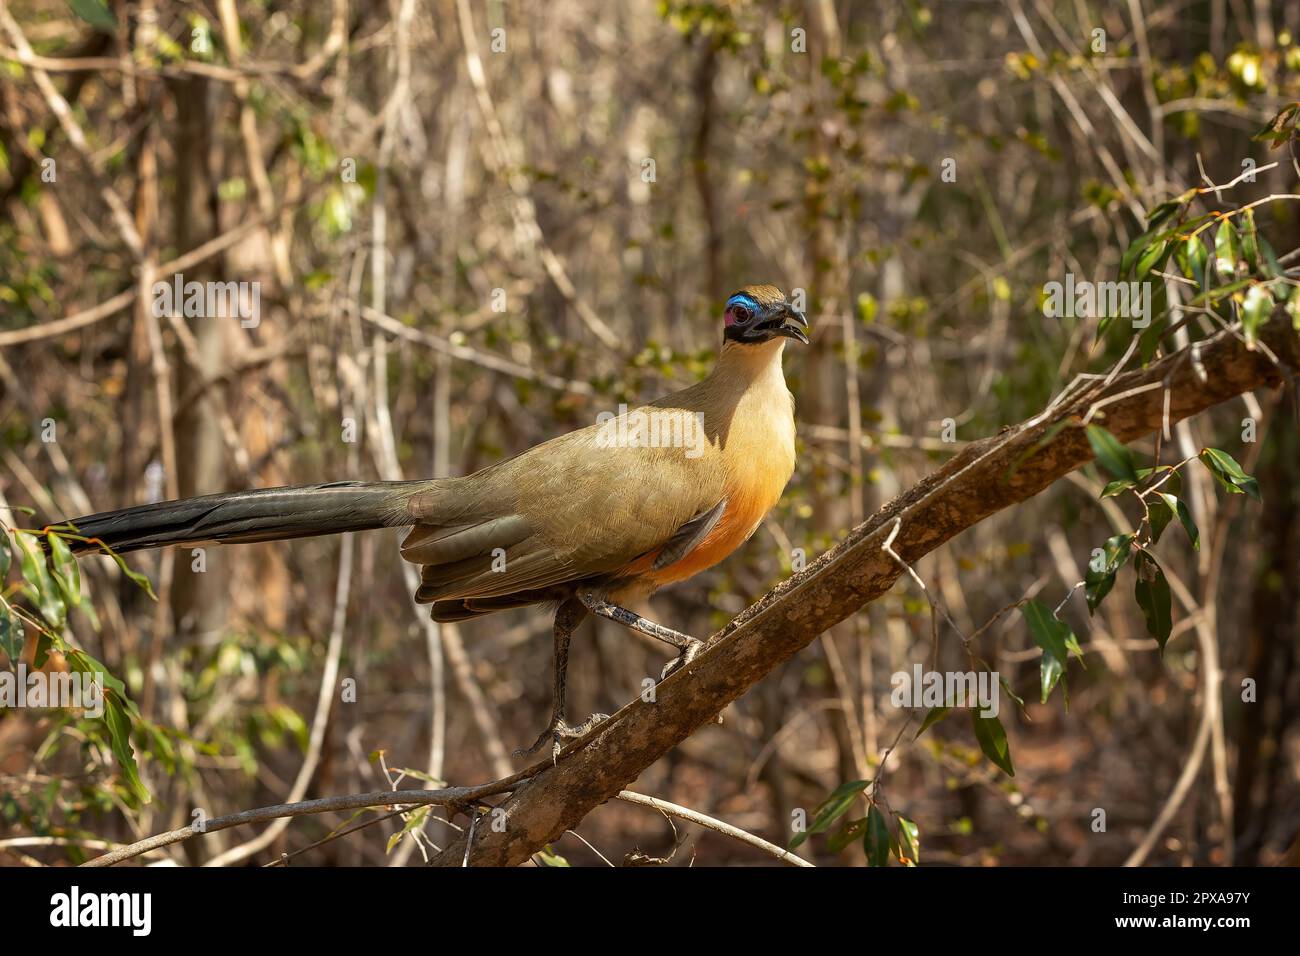 Giant coua (Coua gigas) is a bird species from the coua genus in the cuckoo family that is endemic to the dry forests of western and southern Madagasc Stock Photo